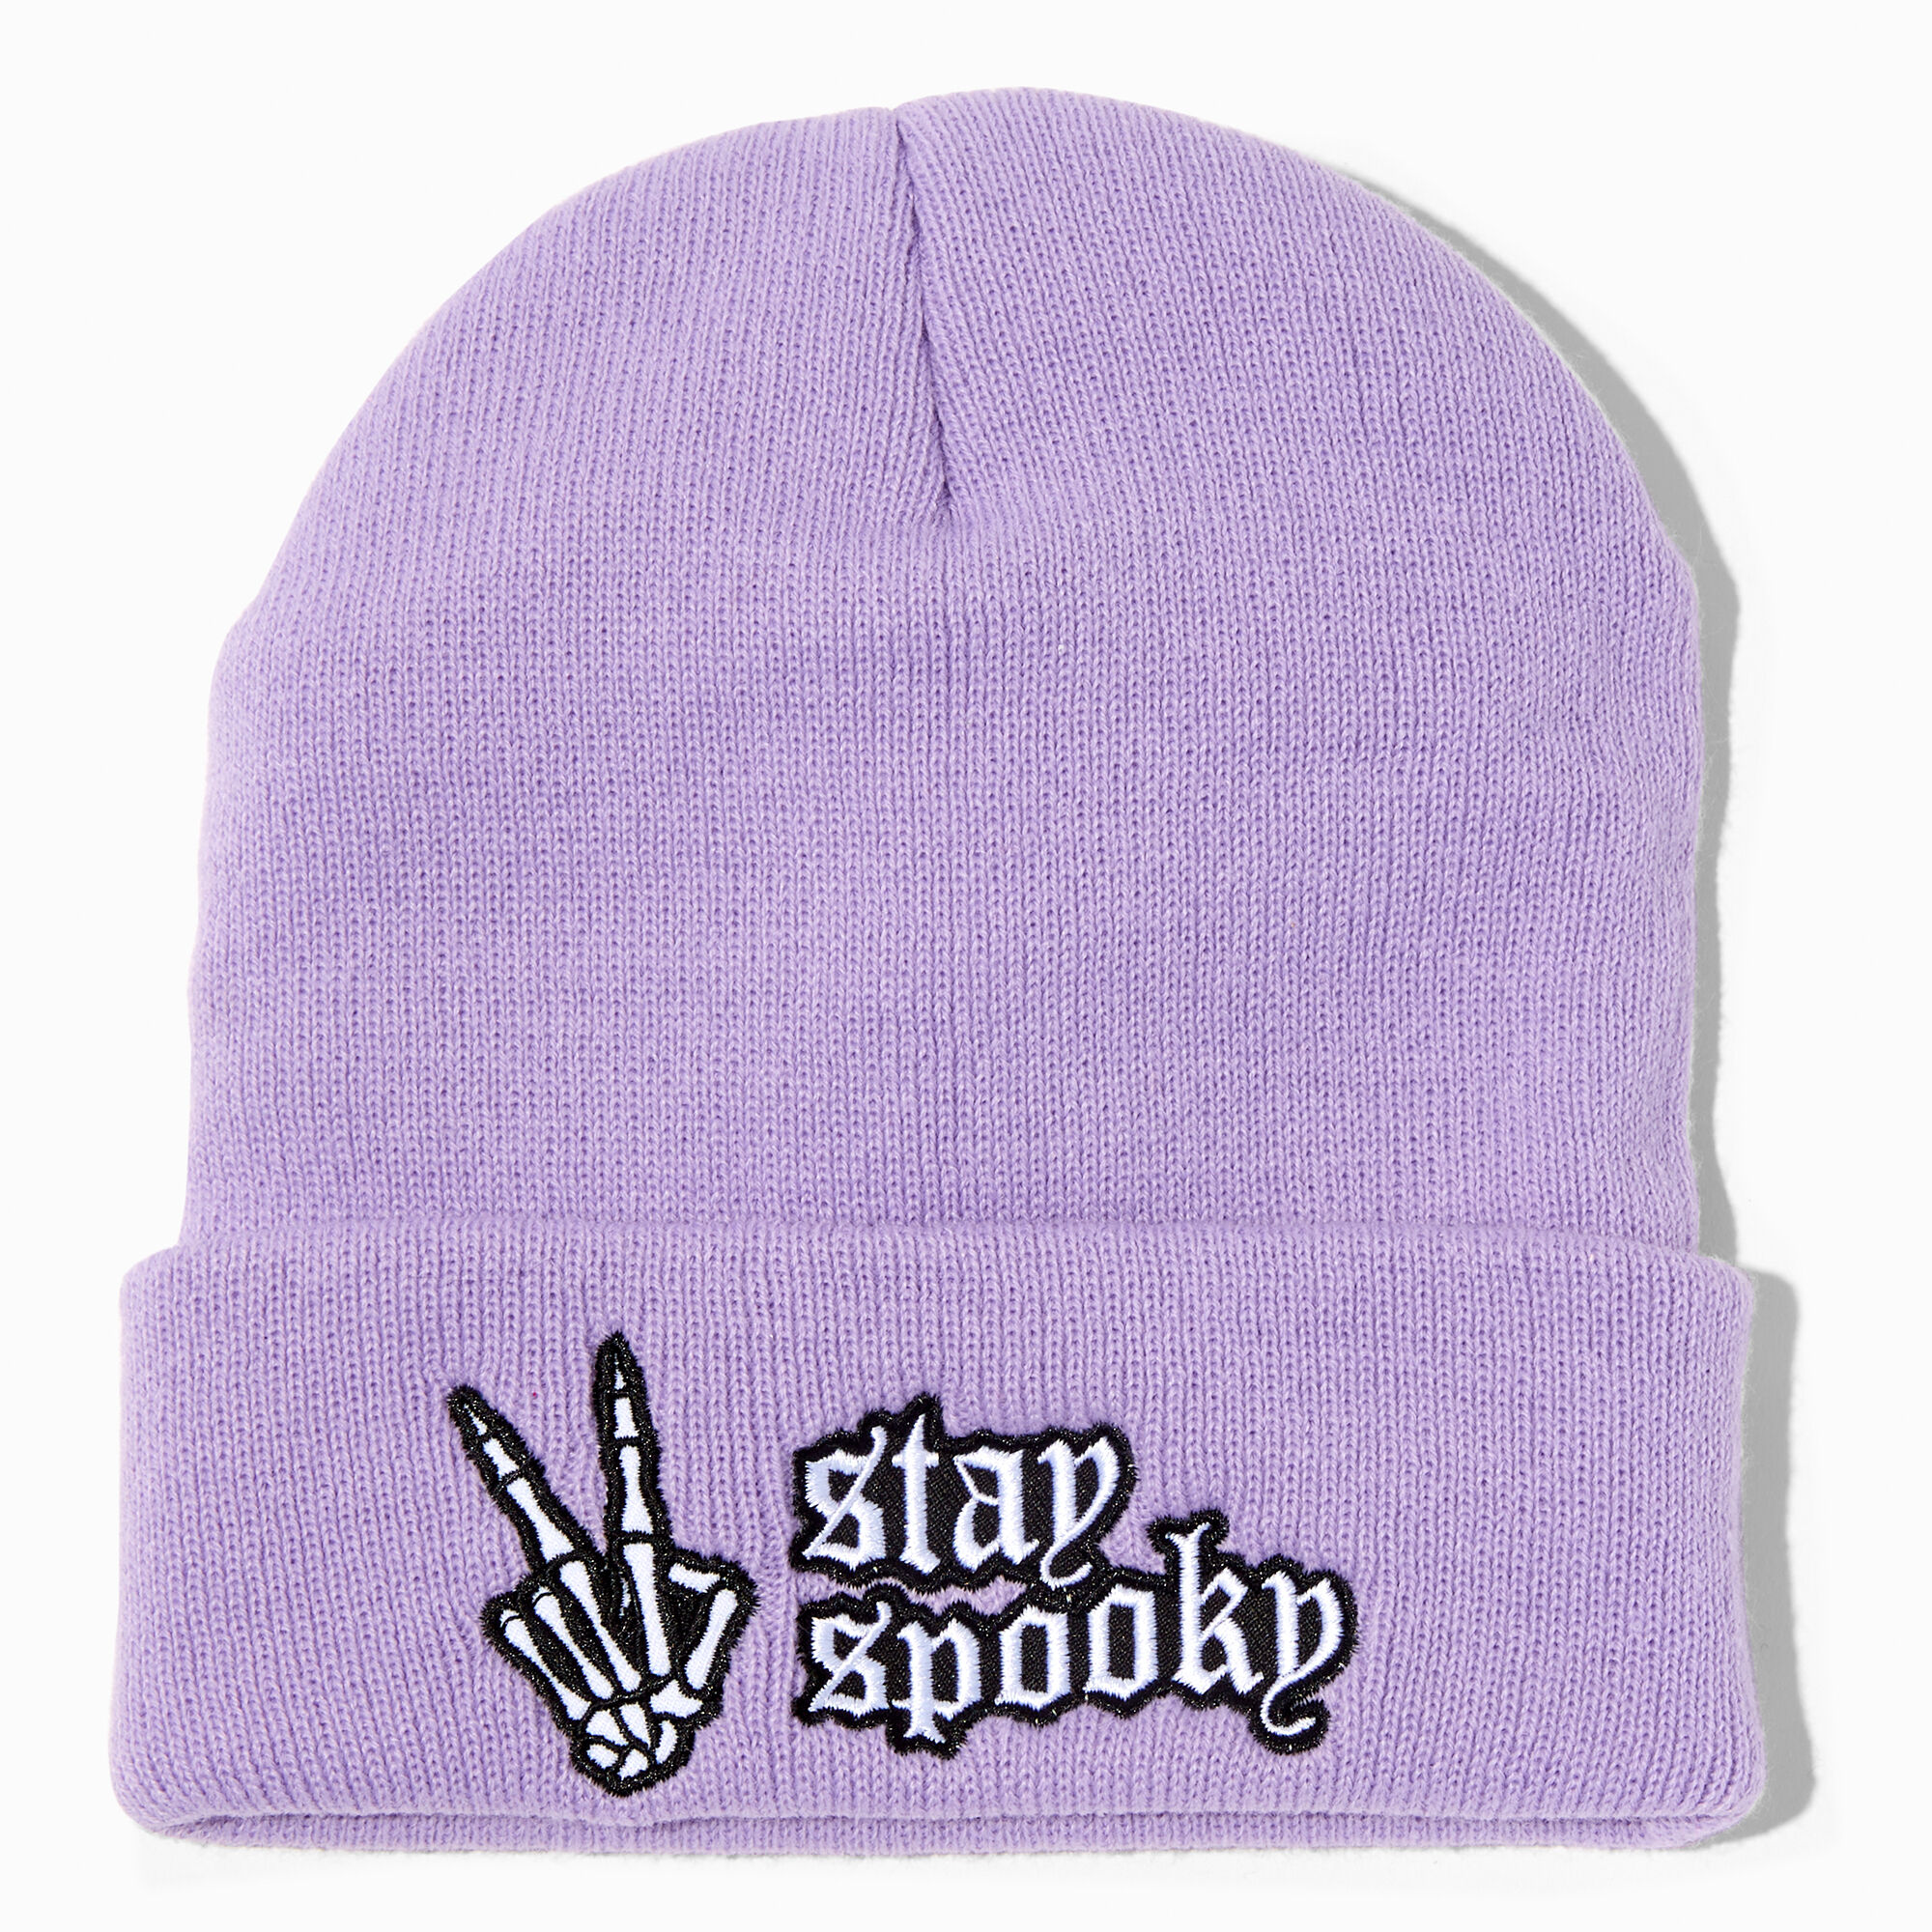 View Claires stay Spooky Lavender Beanie Hat information